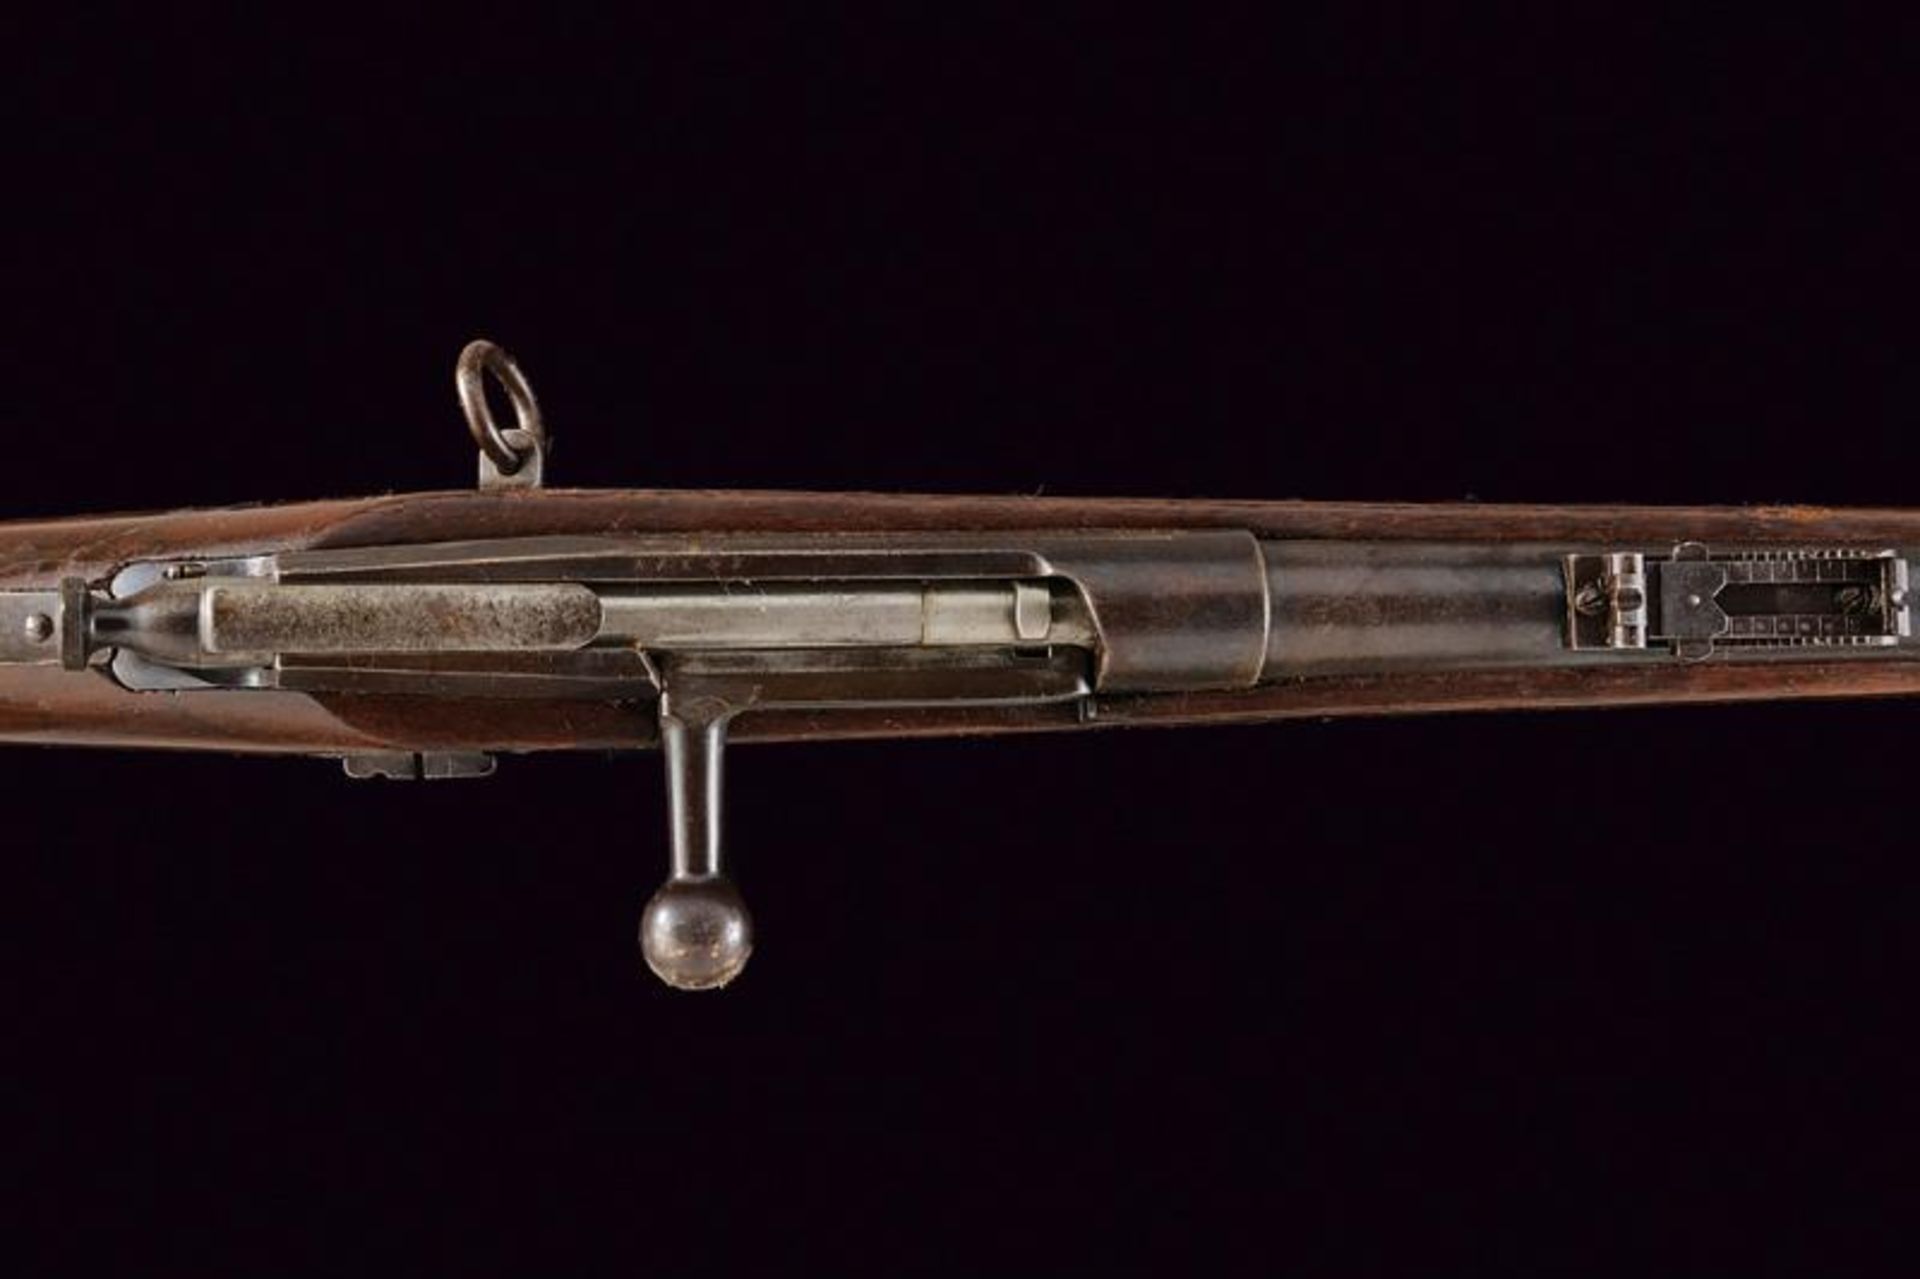 A Winchester-Hotchkiss Bolt Action Carbine - Image 3 of 6